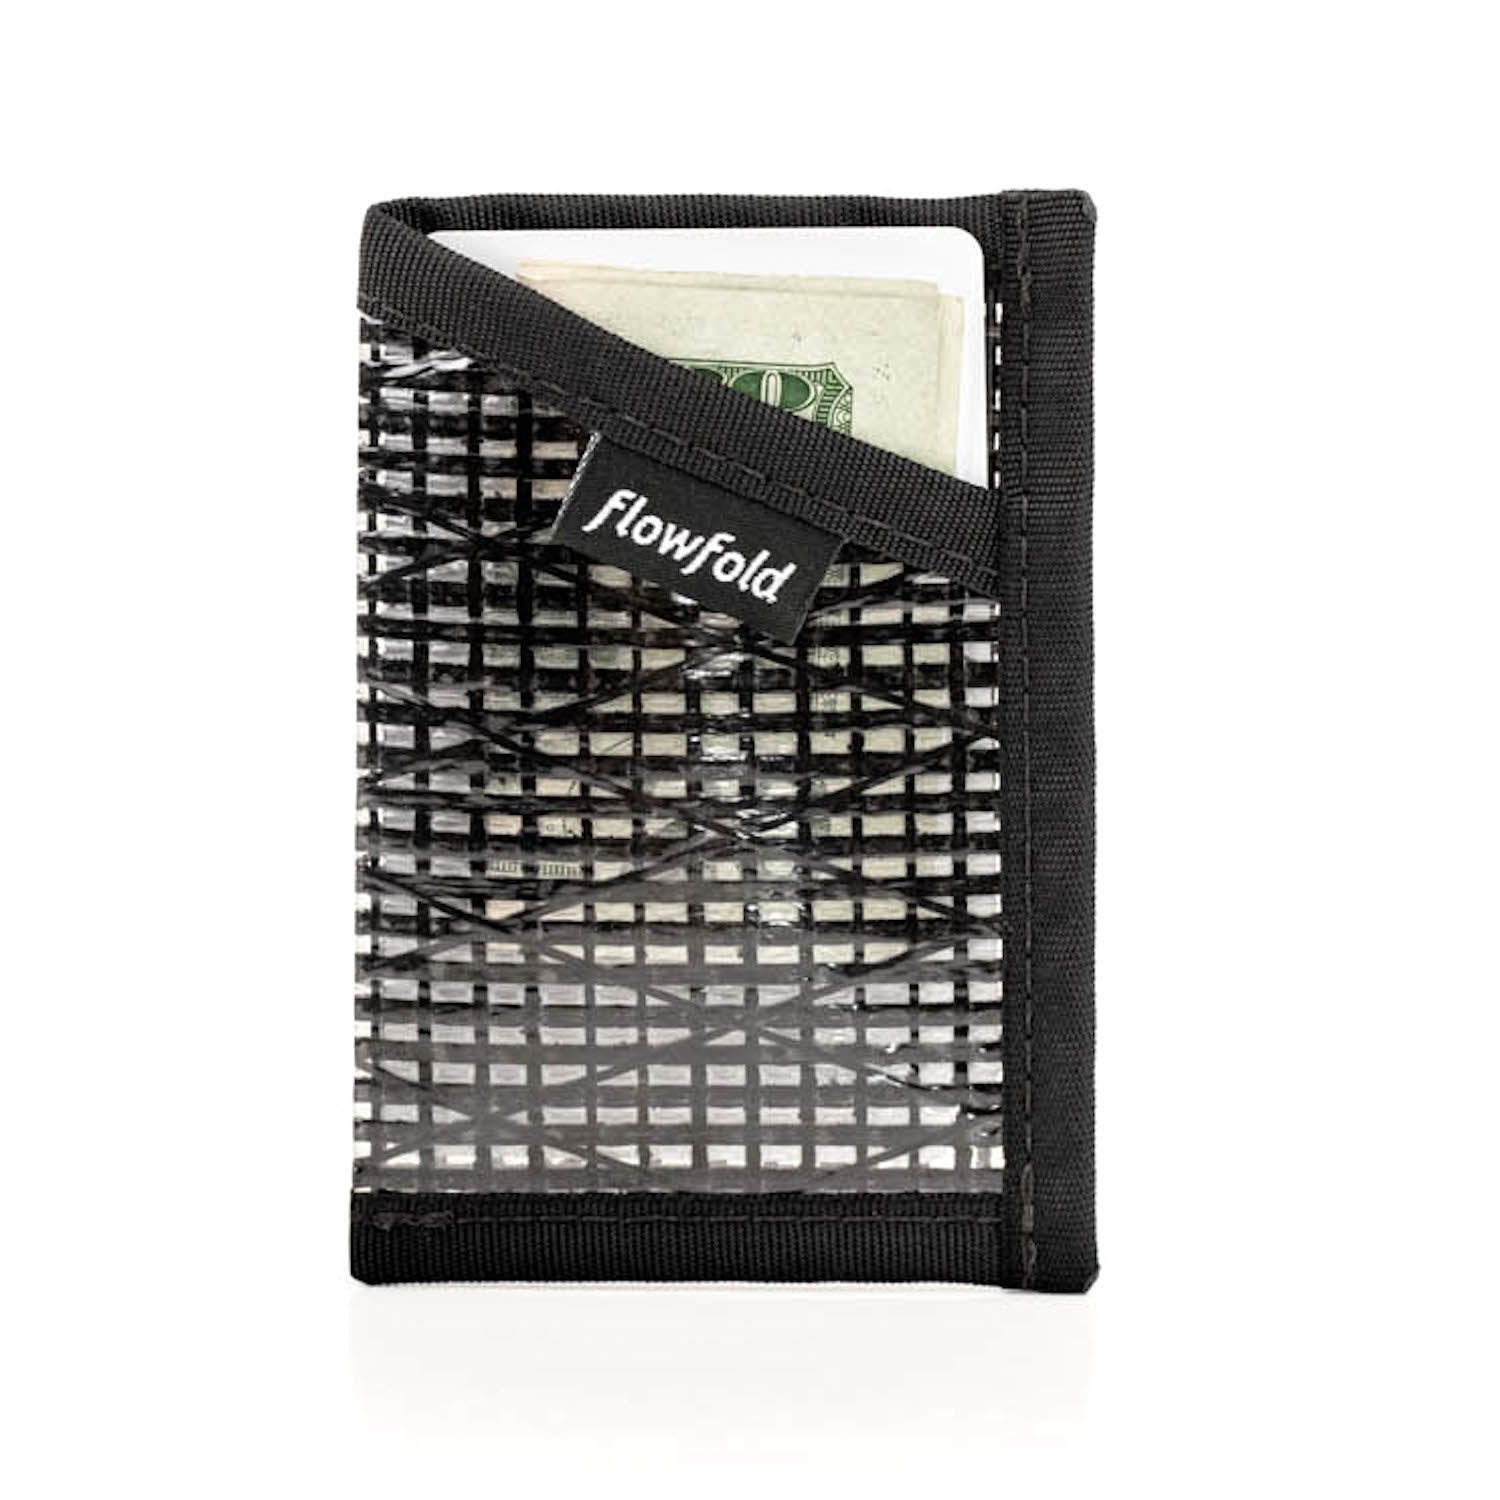 Flowfold Black Recycled Sailcloth Minimalist Card Holder Wallet Made in USA, Maine by Flowfold Holding Cards and Cash 